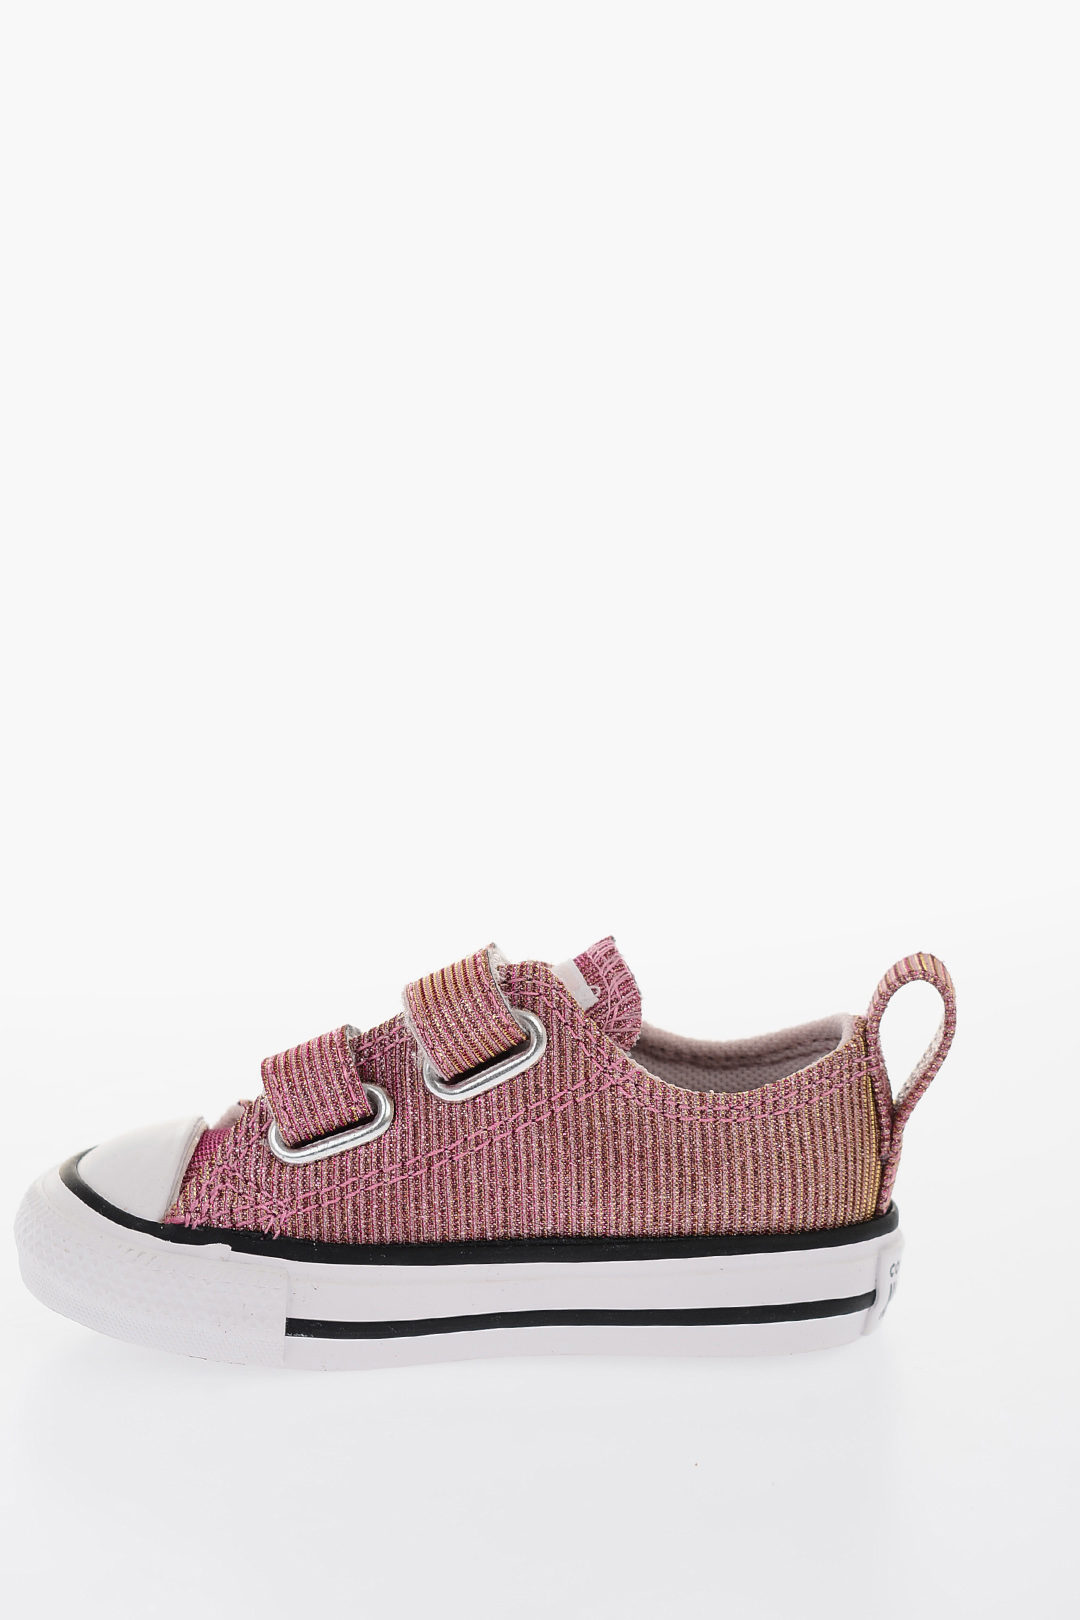 Converse KIDS ALL STAR Lurex Sneakers with Strap Closure girls - Glamood Outlet